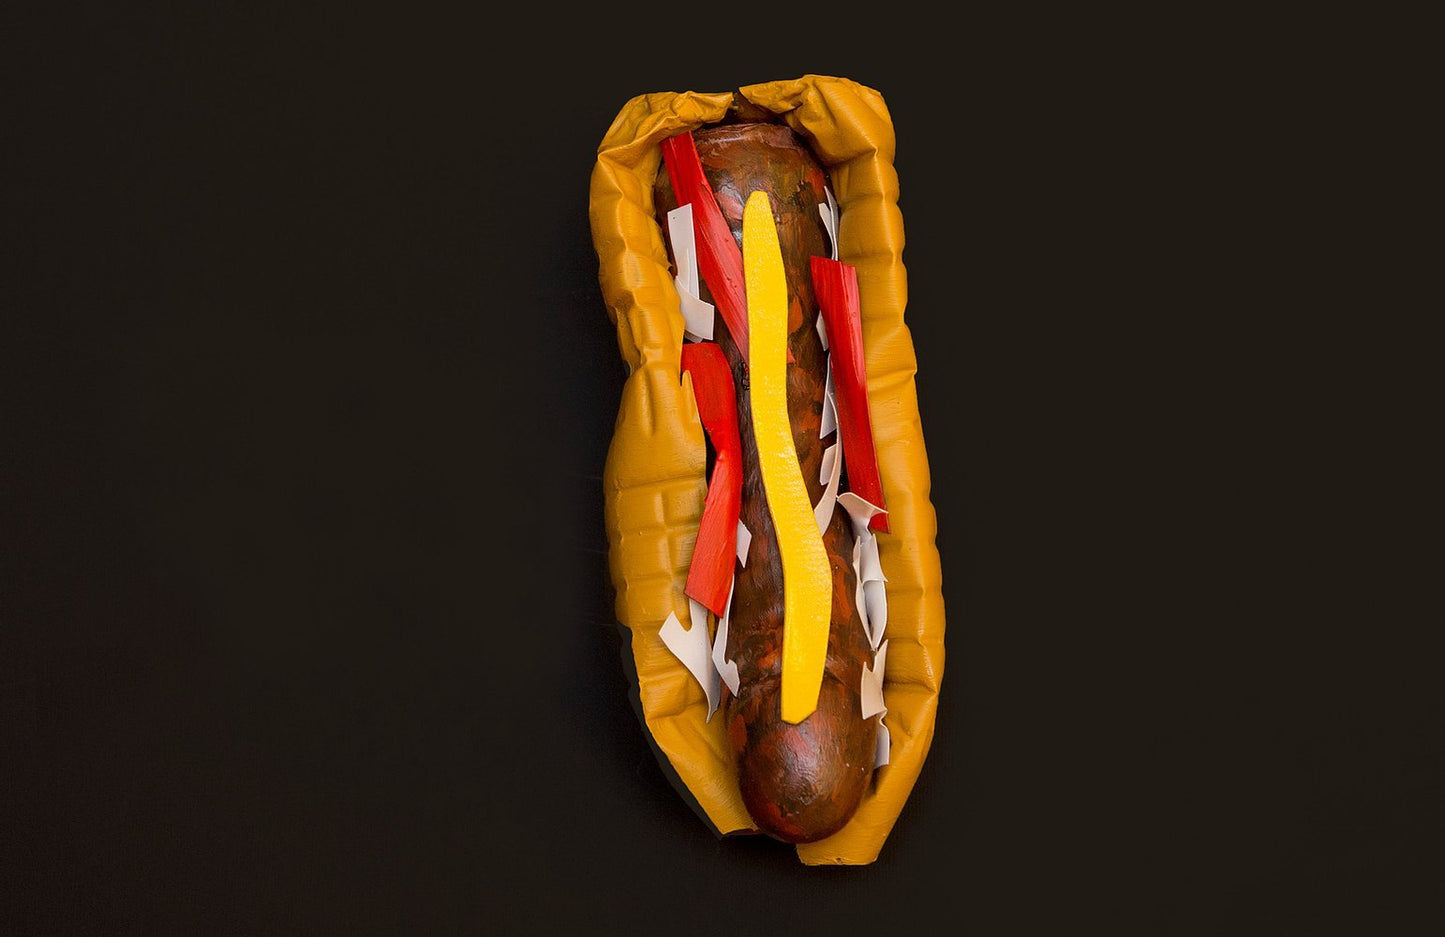 The Hot Dog - What's For Dinner? (no. 11) - The Curators